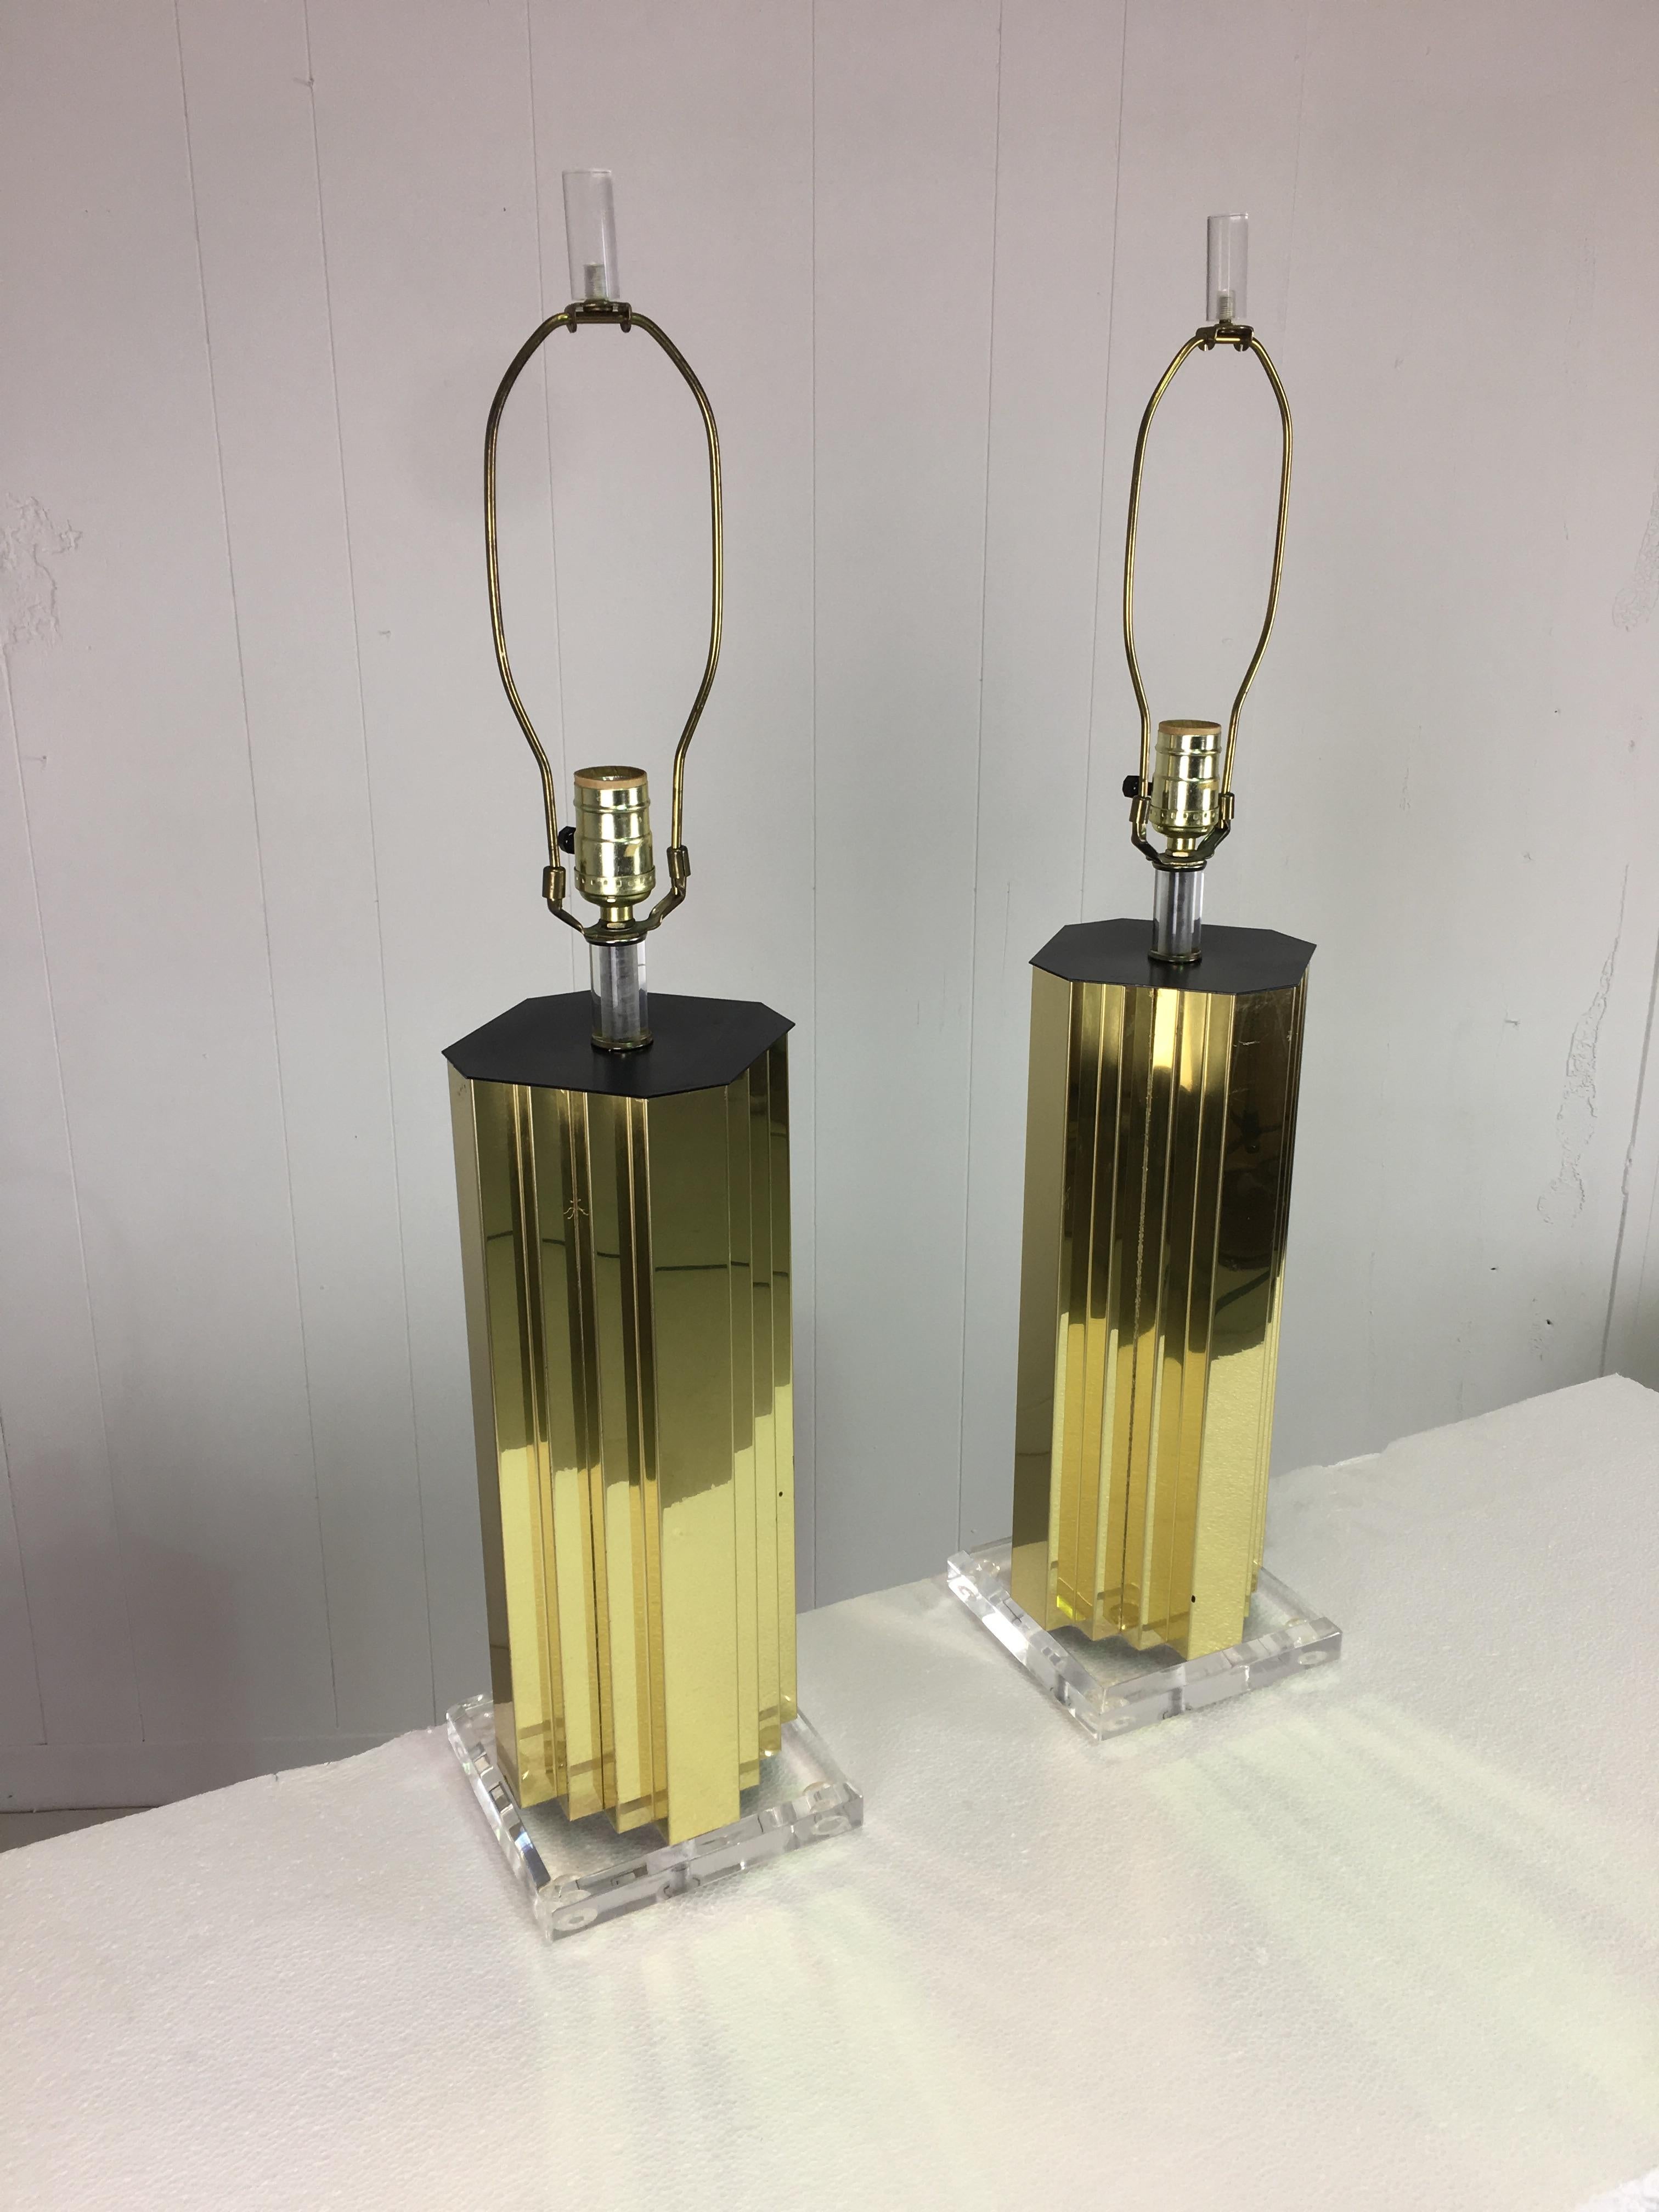 Probably 1980s production as part of the Art Deco Revival period. Skyscraper modernist lamps with Lucite finials, stem to light bulb and bases. In very good condition with only a few spots of oxidation to the brass. The brass is finished on all